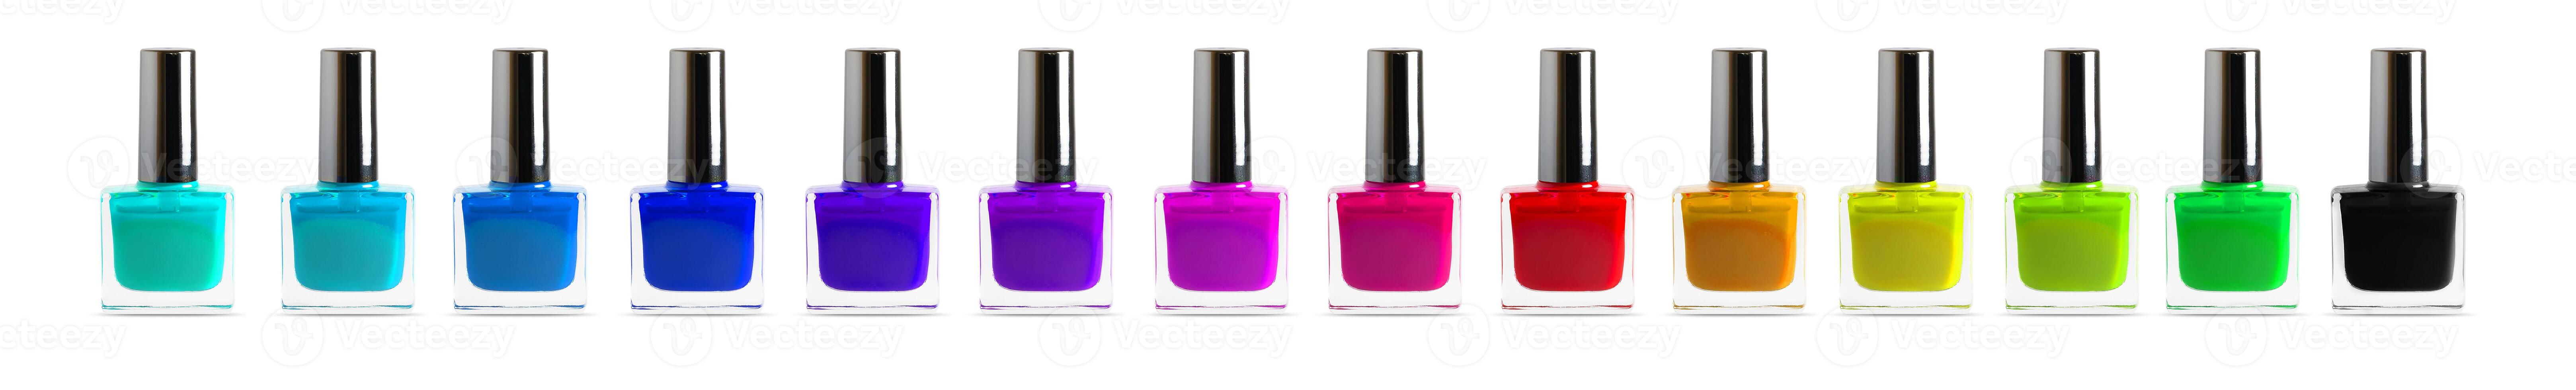 Group of bright nail polishes different colors photo